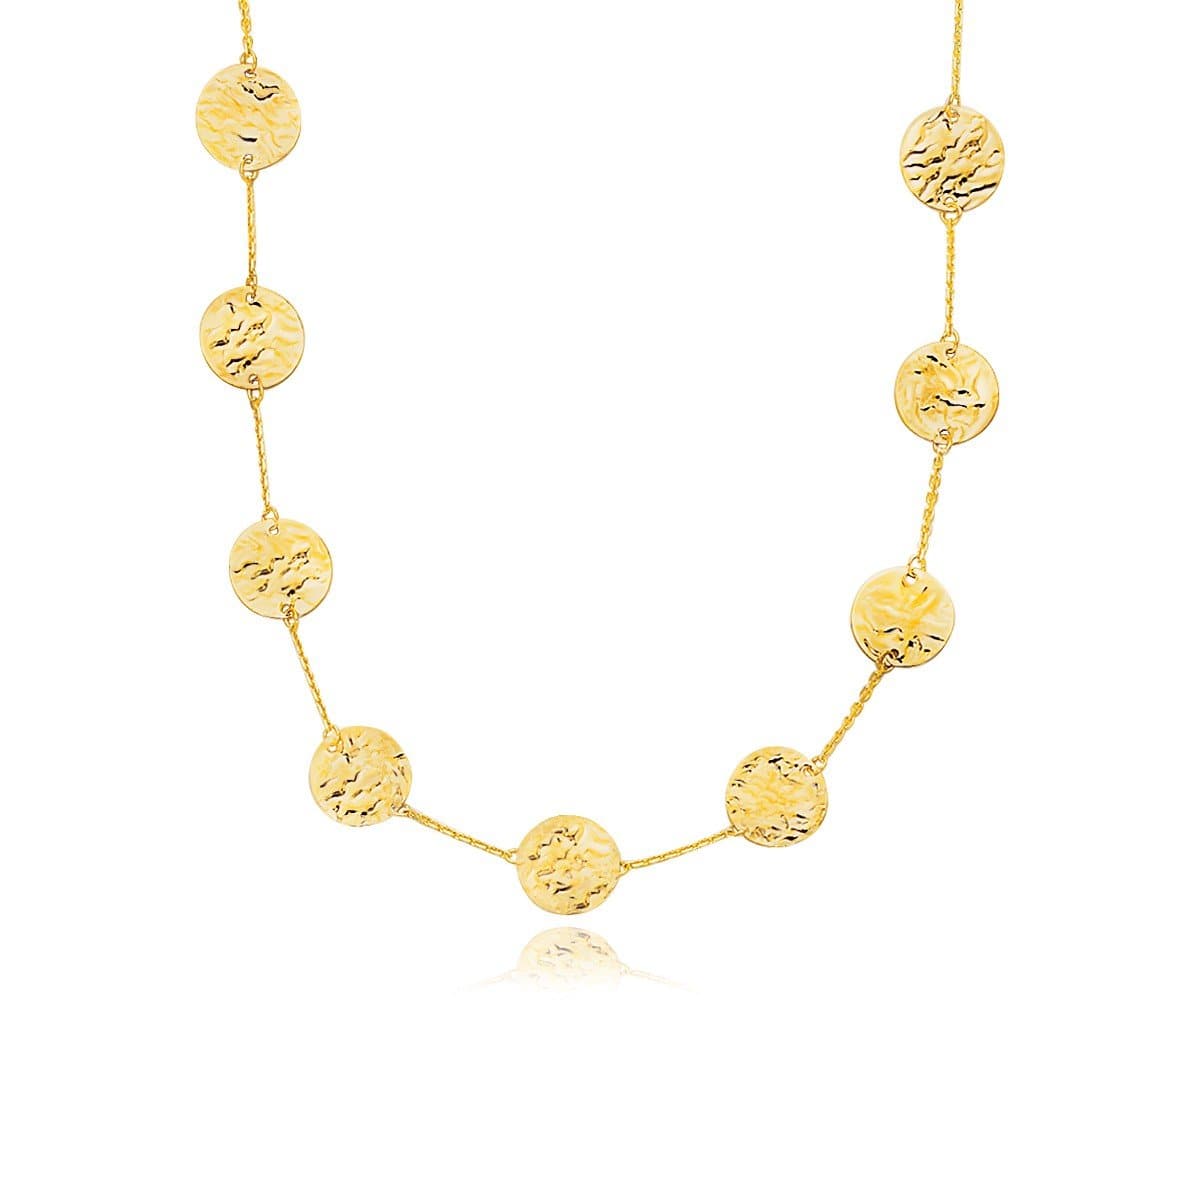 Textured Disc Necklace in 14k Yellow Gold